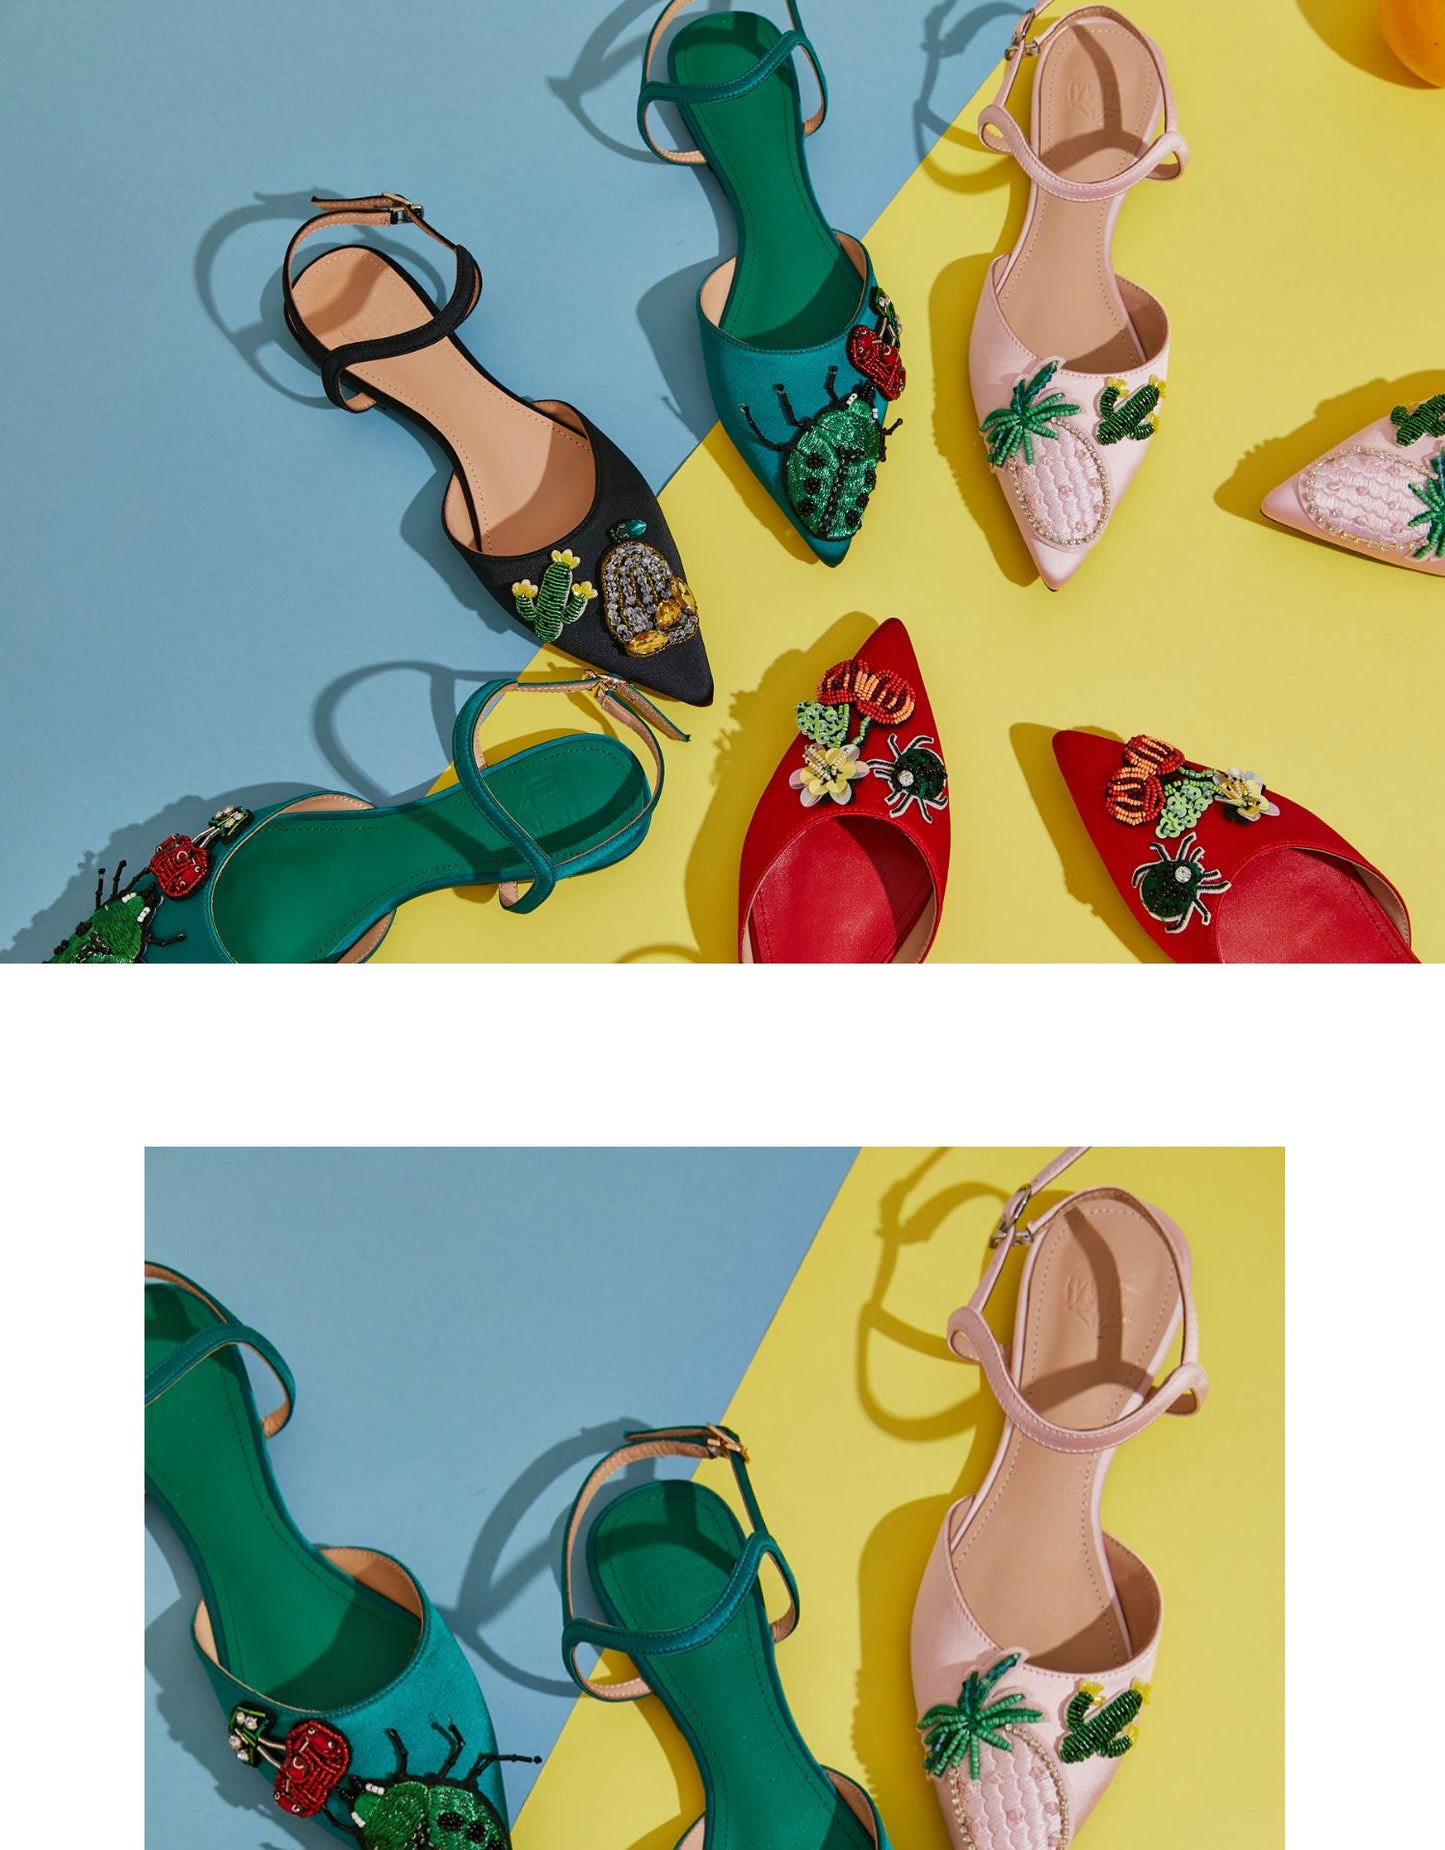 B-FEI original design sweet fruit insects cute sandals single shoes leather- Beatriz